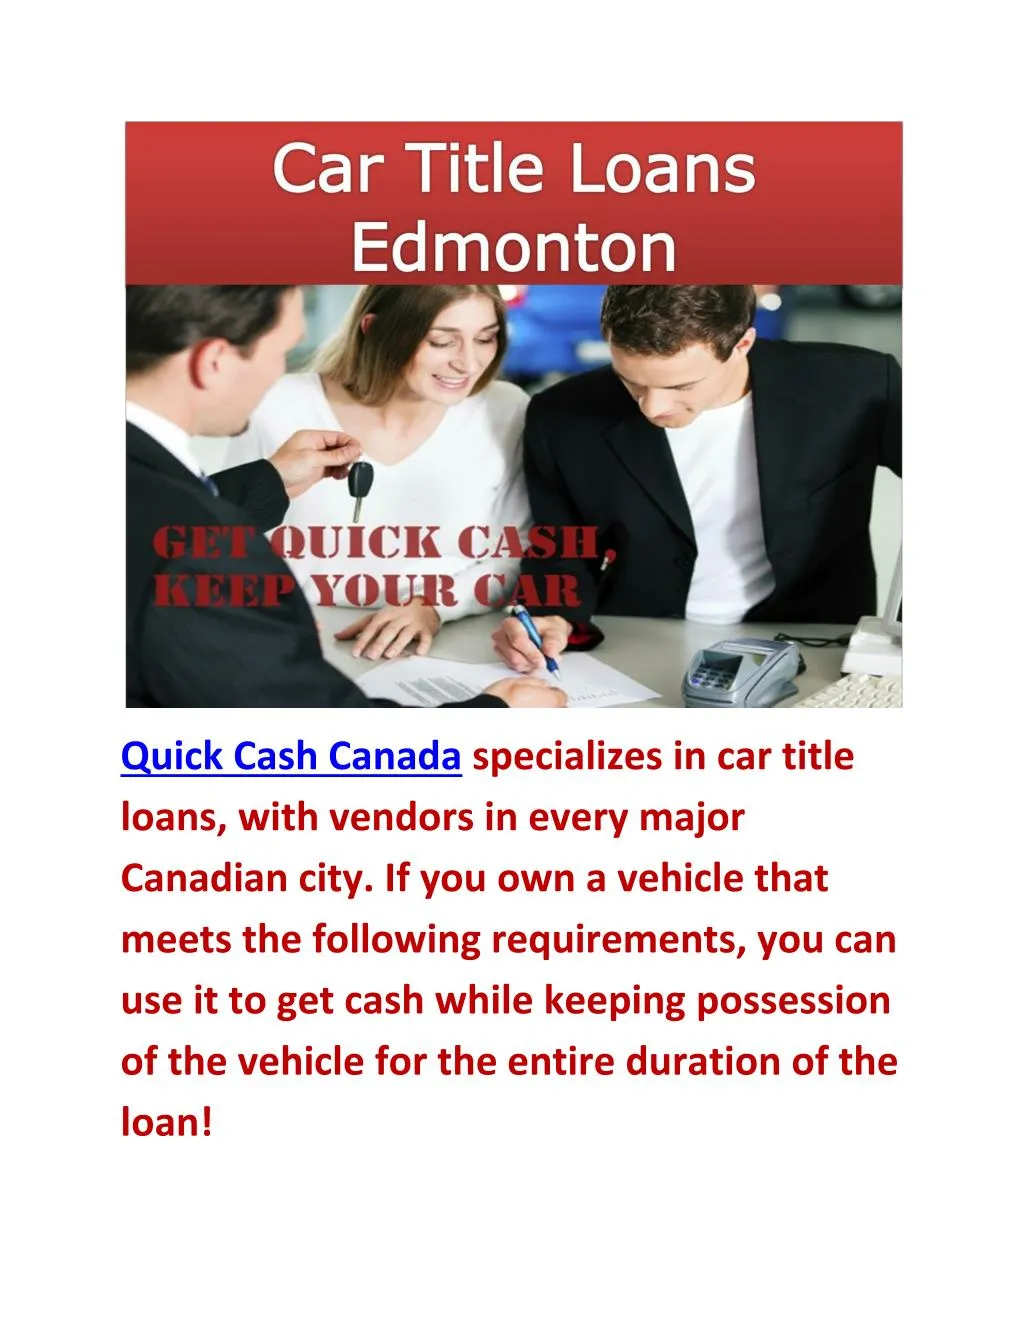 quick cash canada specializes in car title loans